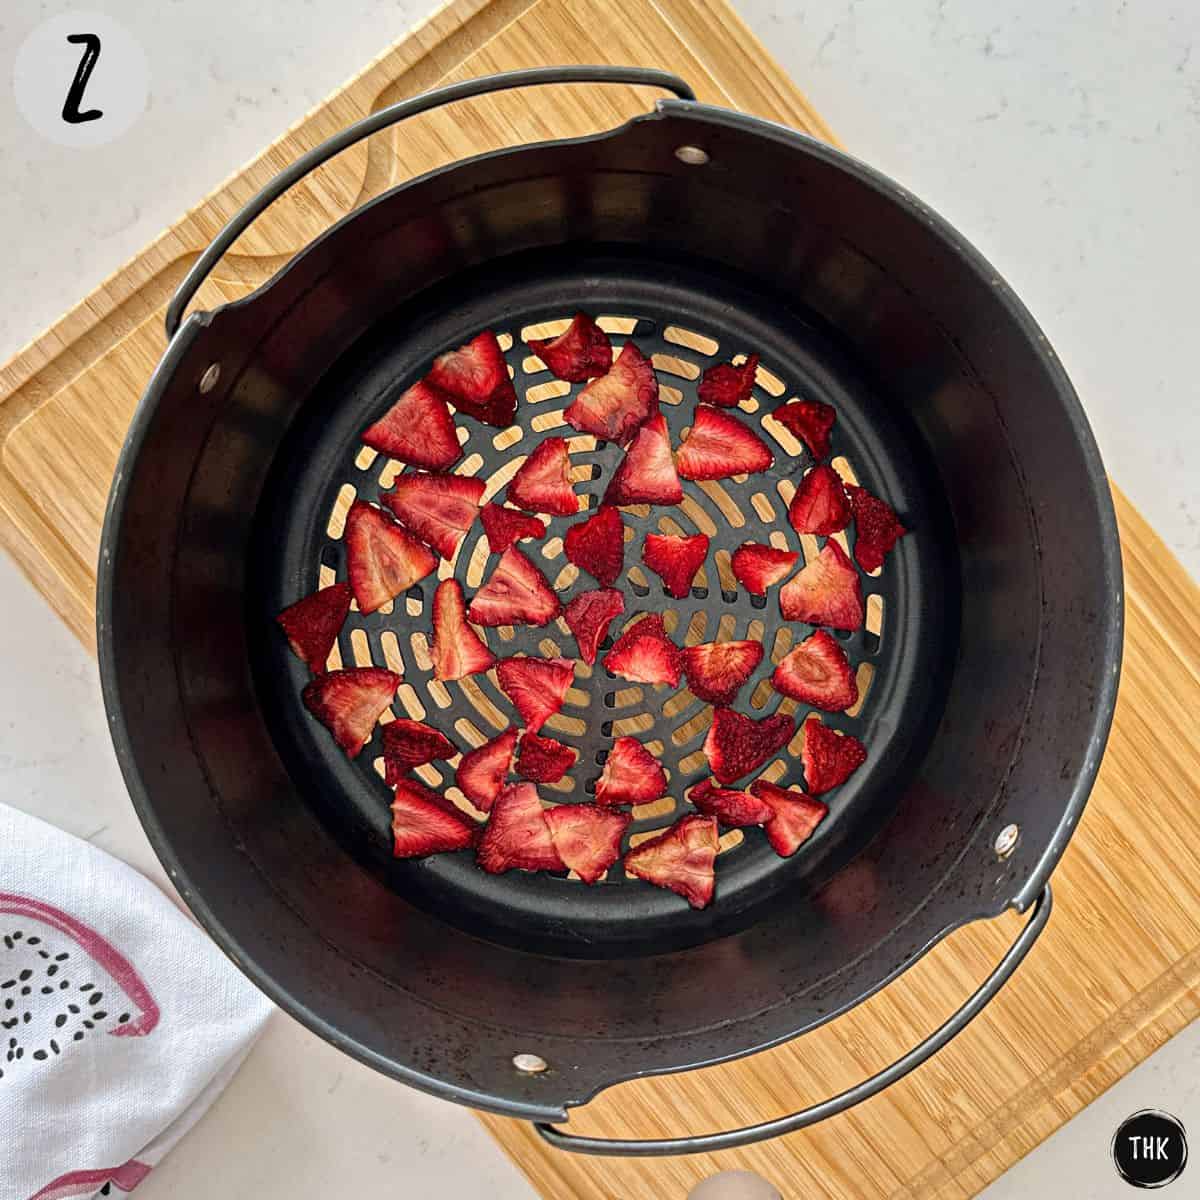 Dehydrated strawberry slices inside air frying basket.